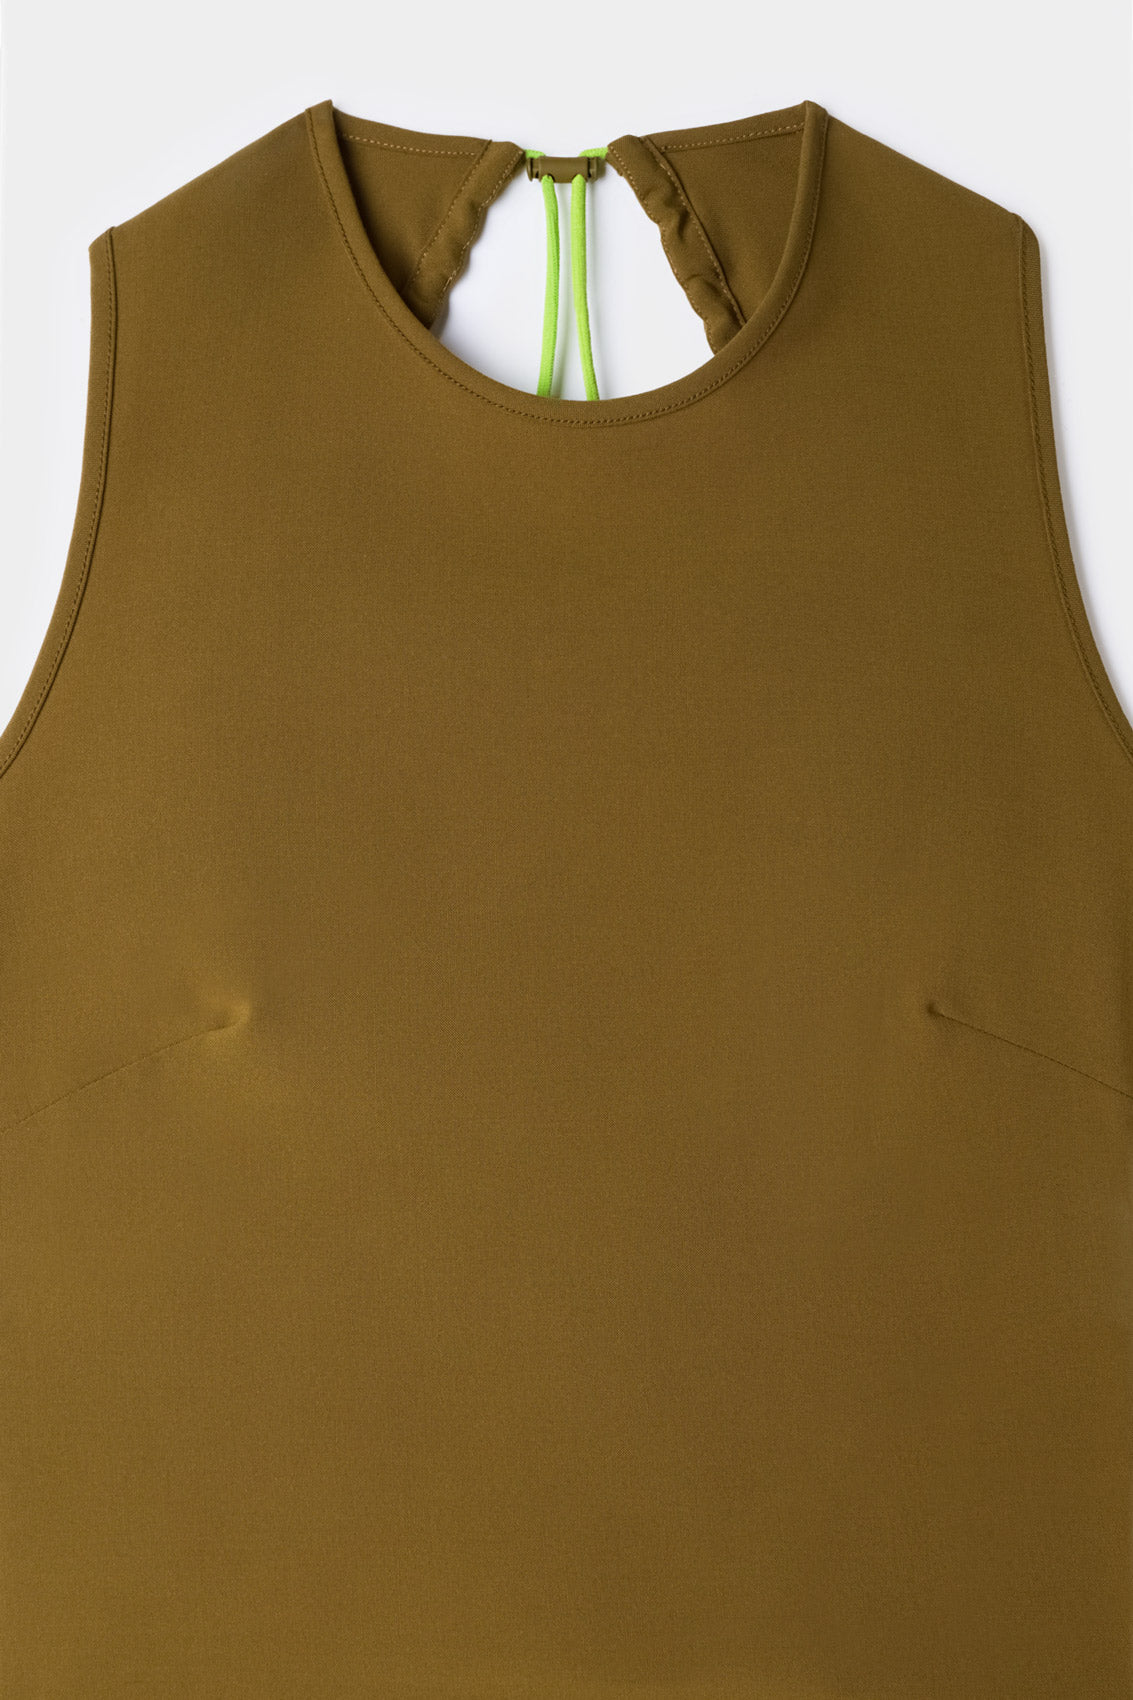 BUCO TOP / olive green